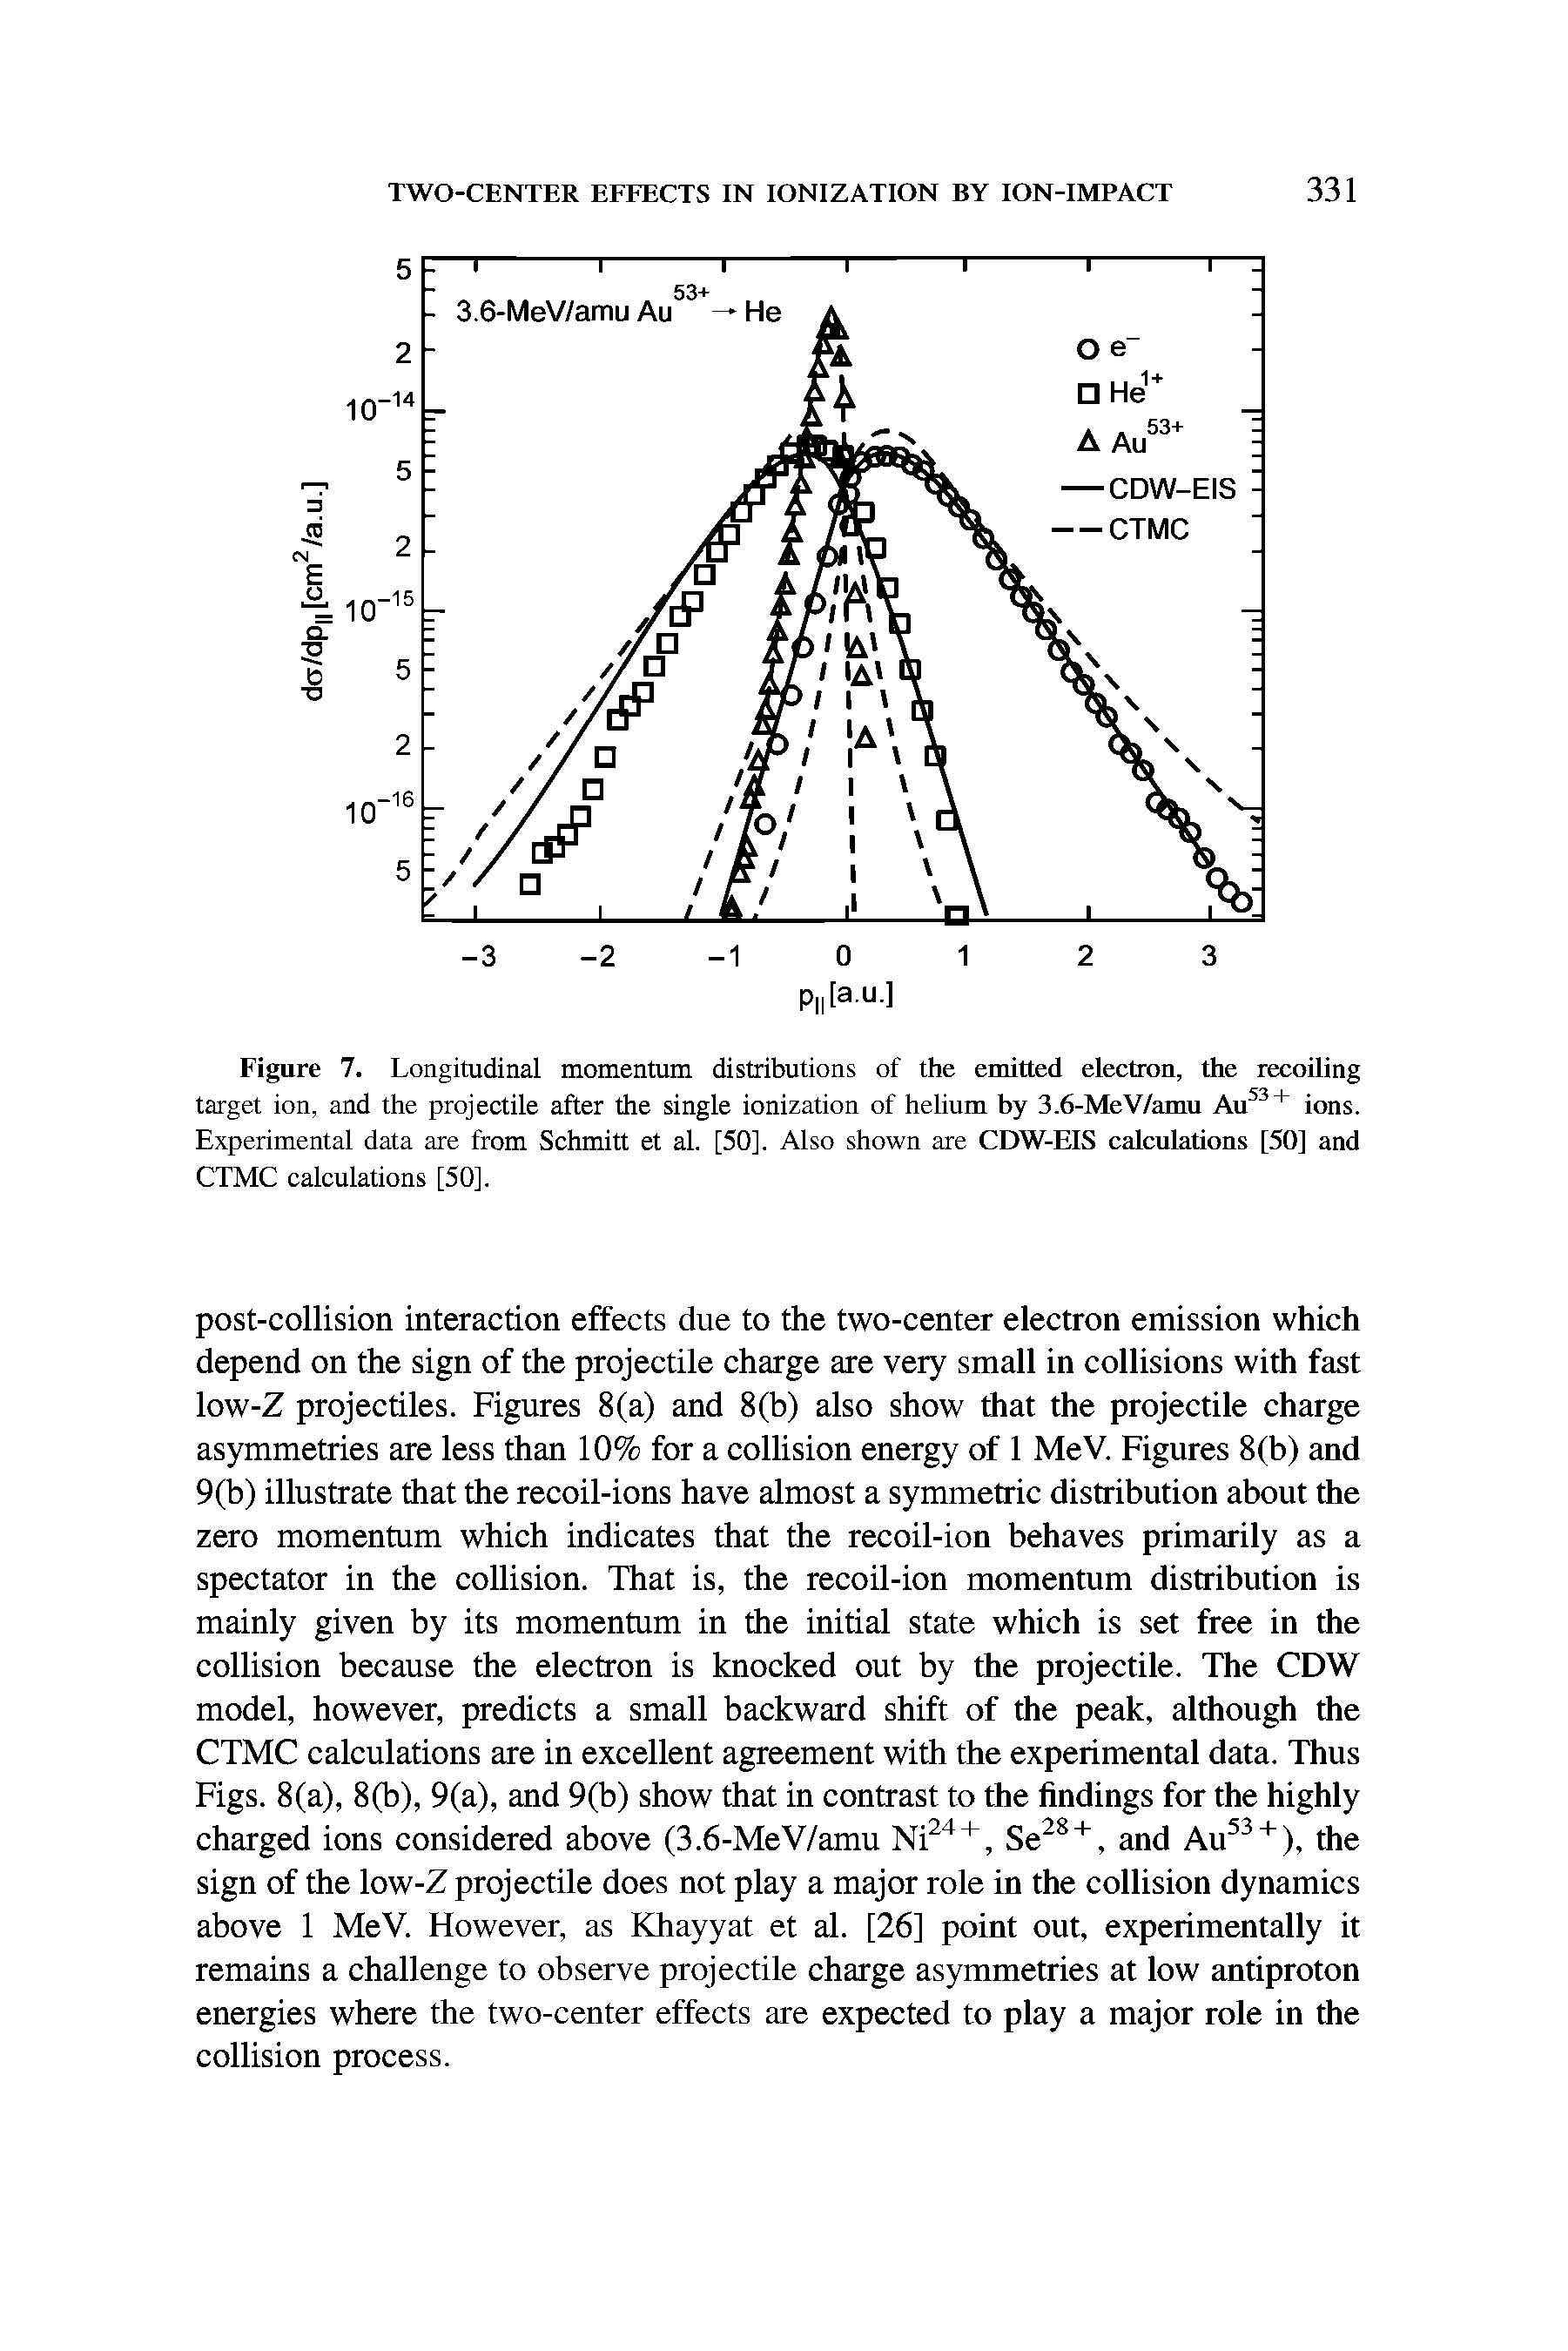 Figure 7. Longitudinal momentum distributions of the emitted electron, the recoiling target ion, and the projectile after the single ionization of helium by 3.6-MeV/amu Au53+ ions. Experimental data are from Schmitt et al. [50]. Also shown are CDW-EIS calculations [50] and CTMC calculations [50].